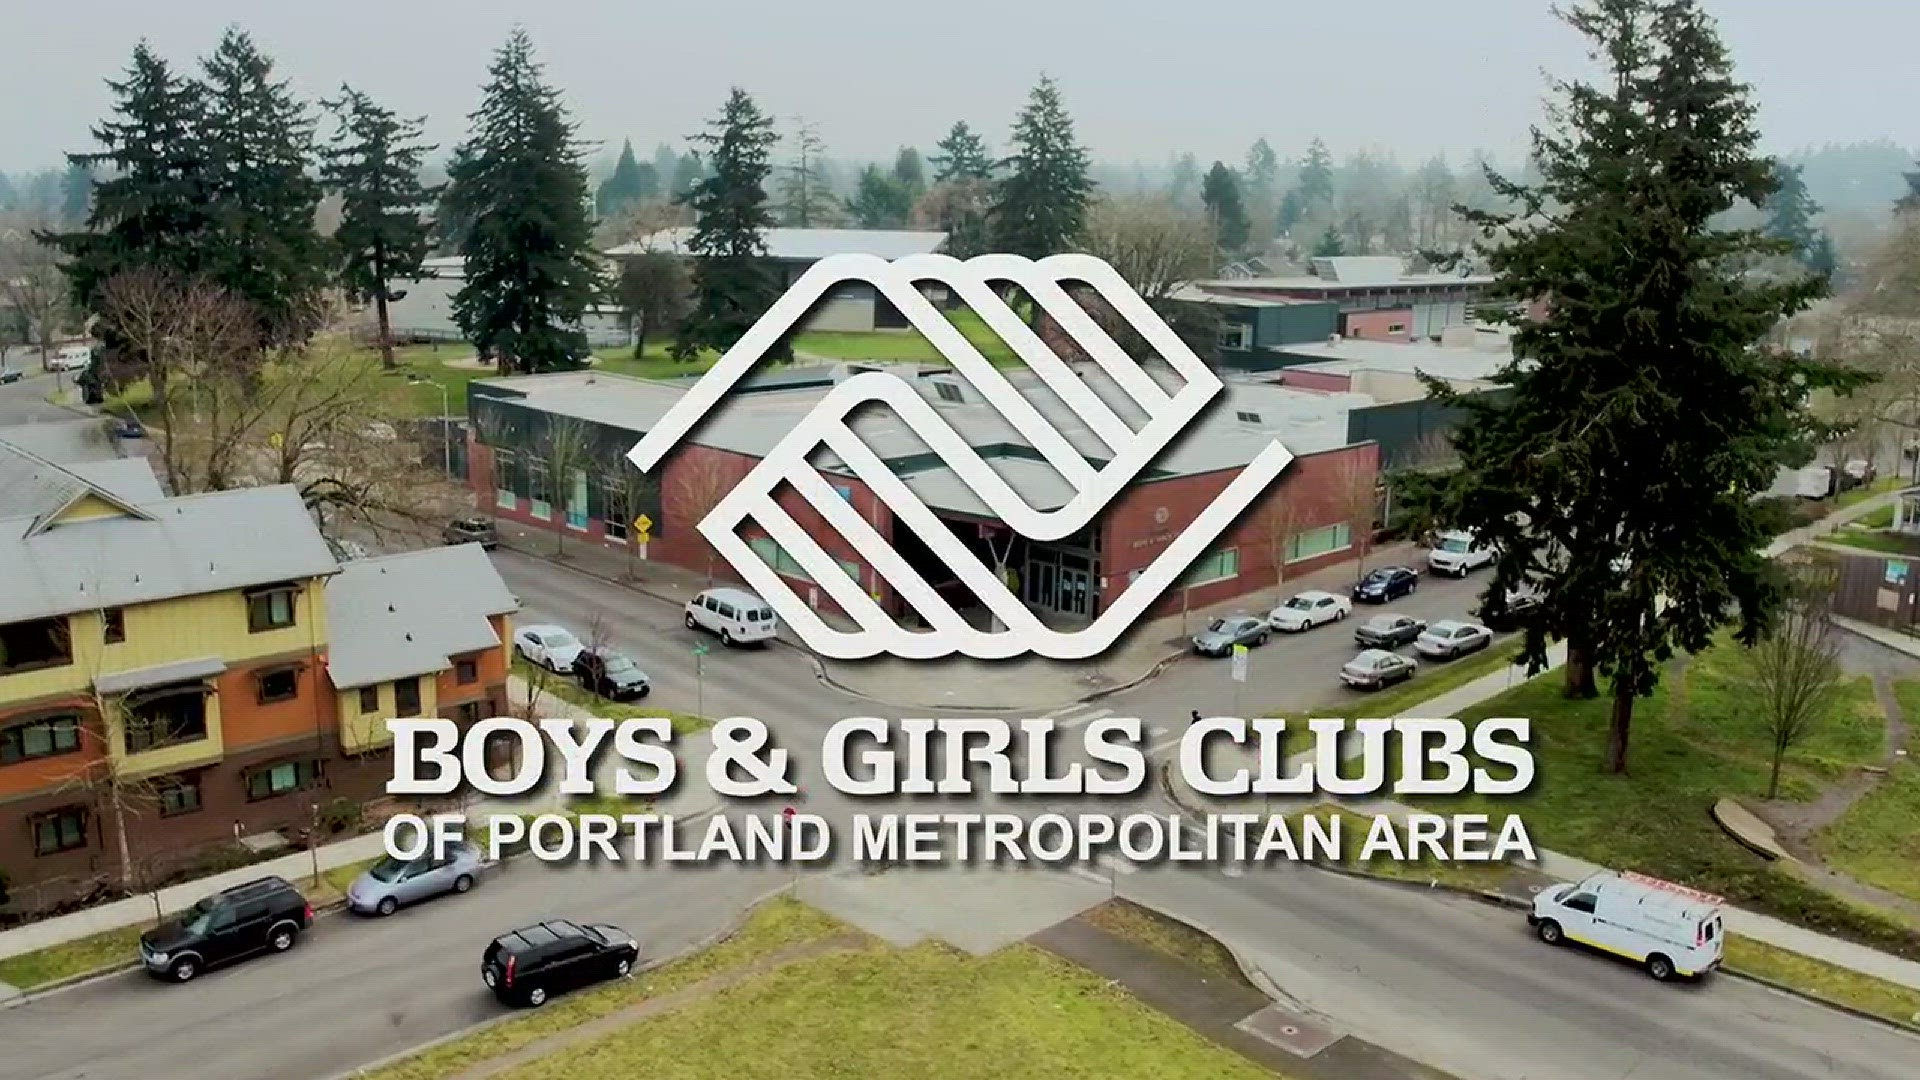 The Boys and Girls Clubs of Portland is trying to raise funds to support a Rockwood location in SE Portland, June 2017